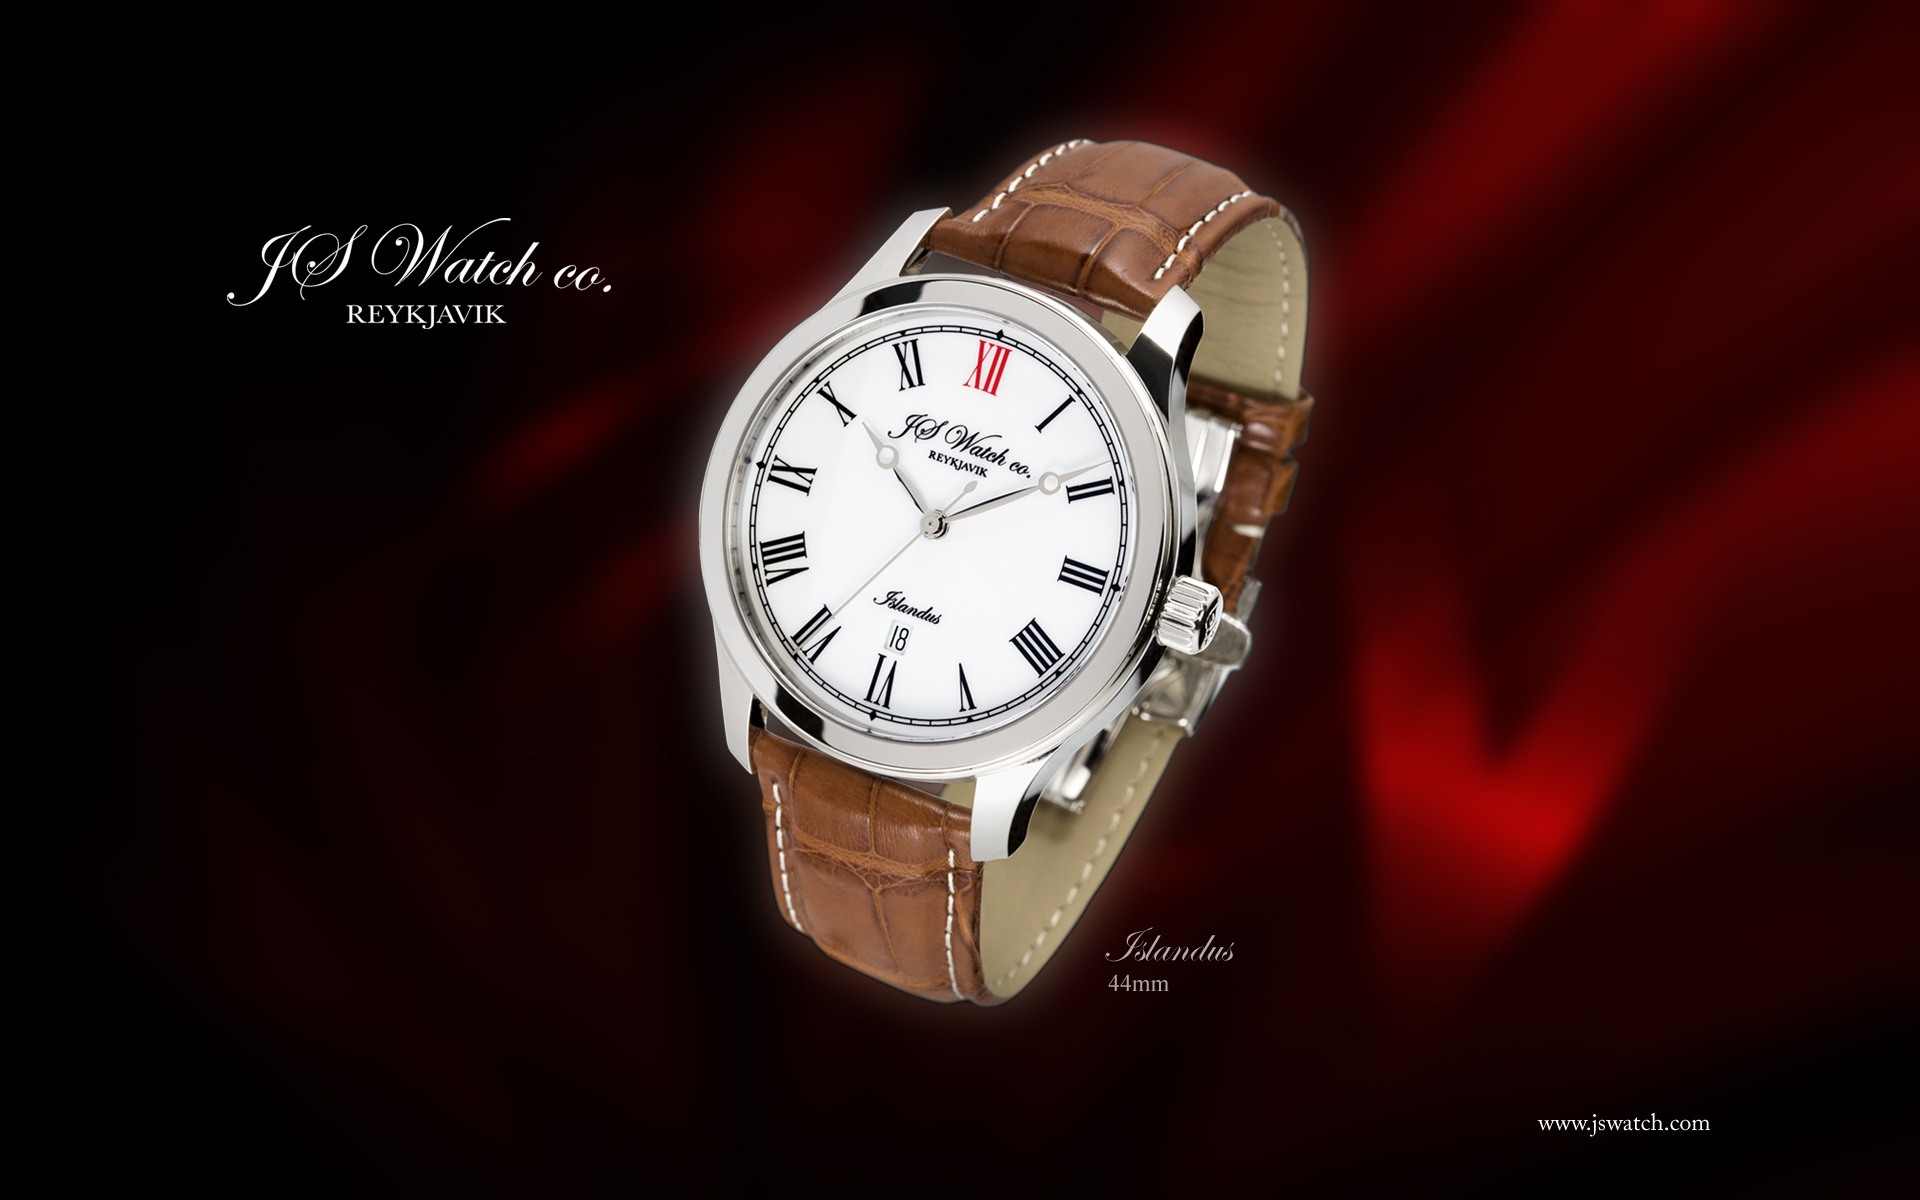 World famous watches wallpapers (2) #1 - 1920x1200